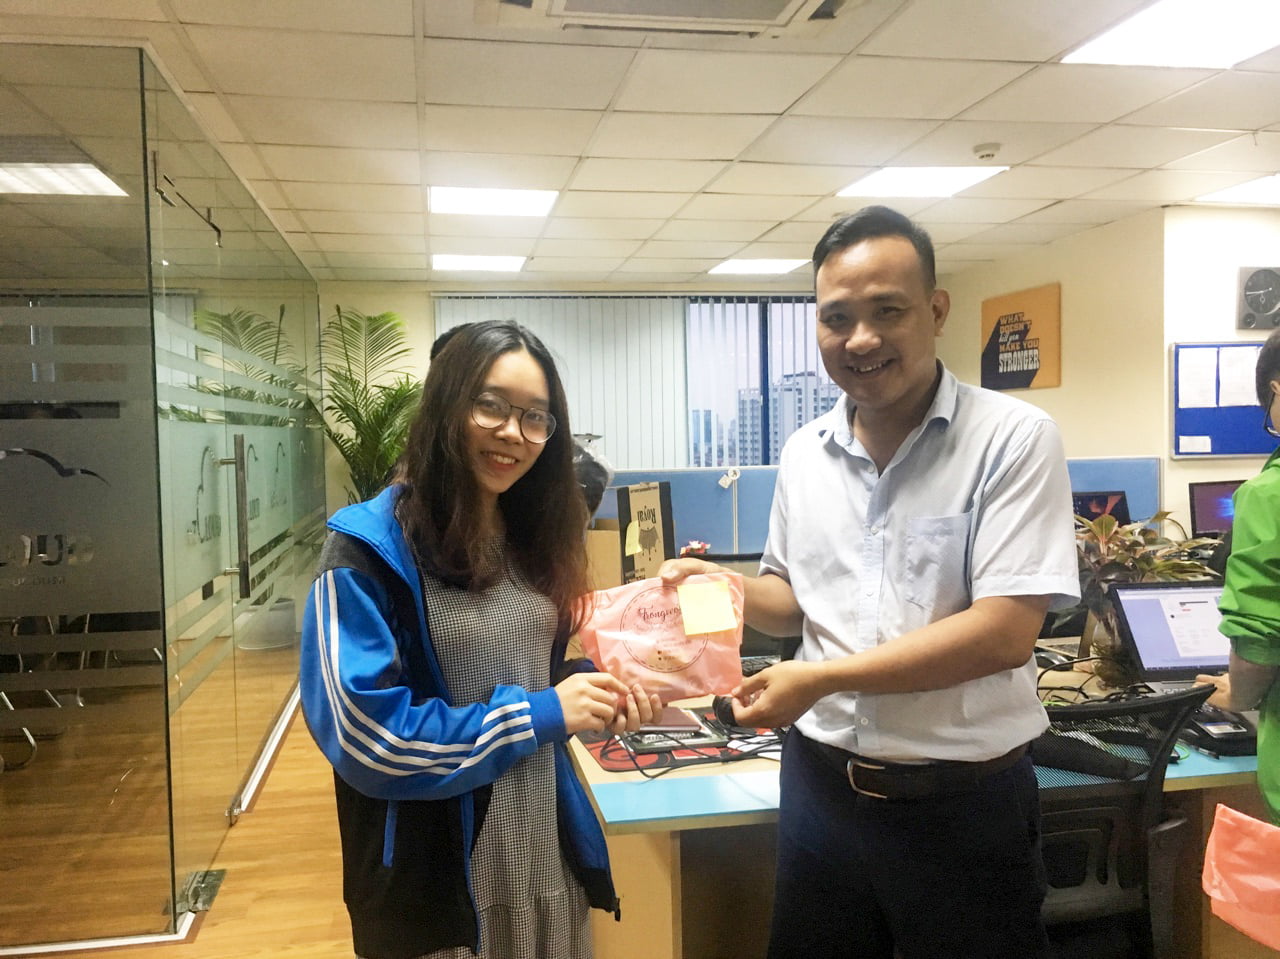 The CEO gives gifts to Van - Hanoi